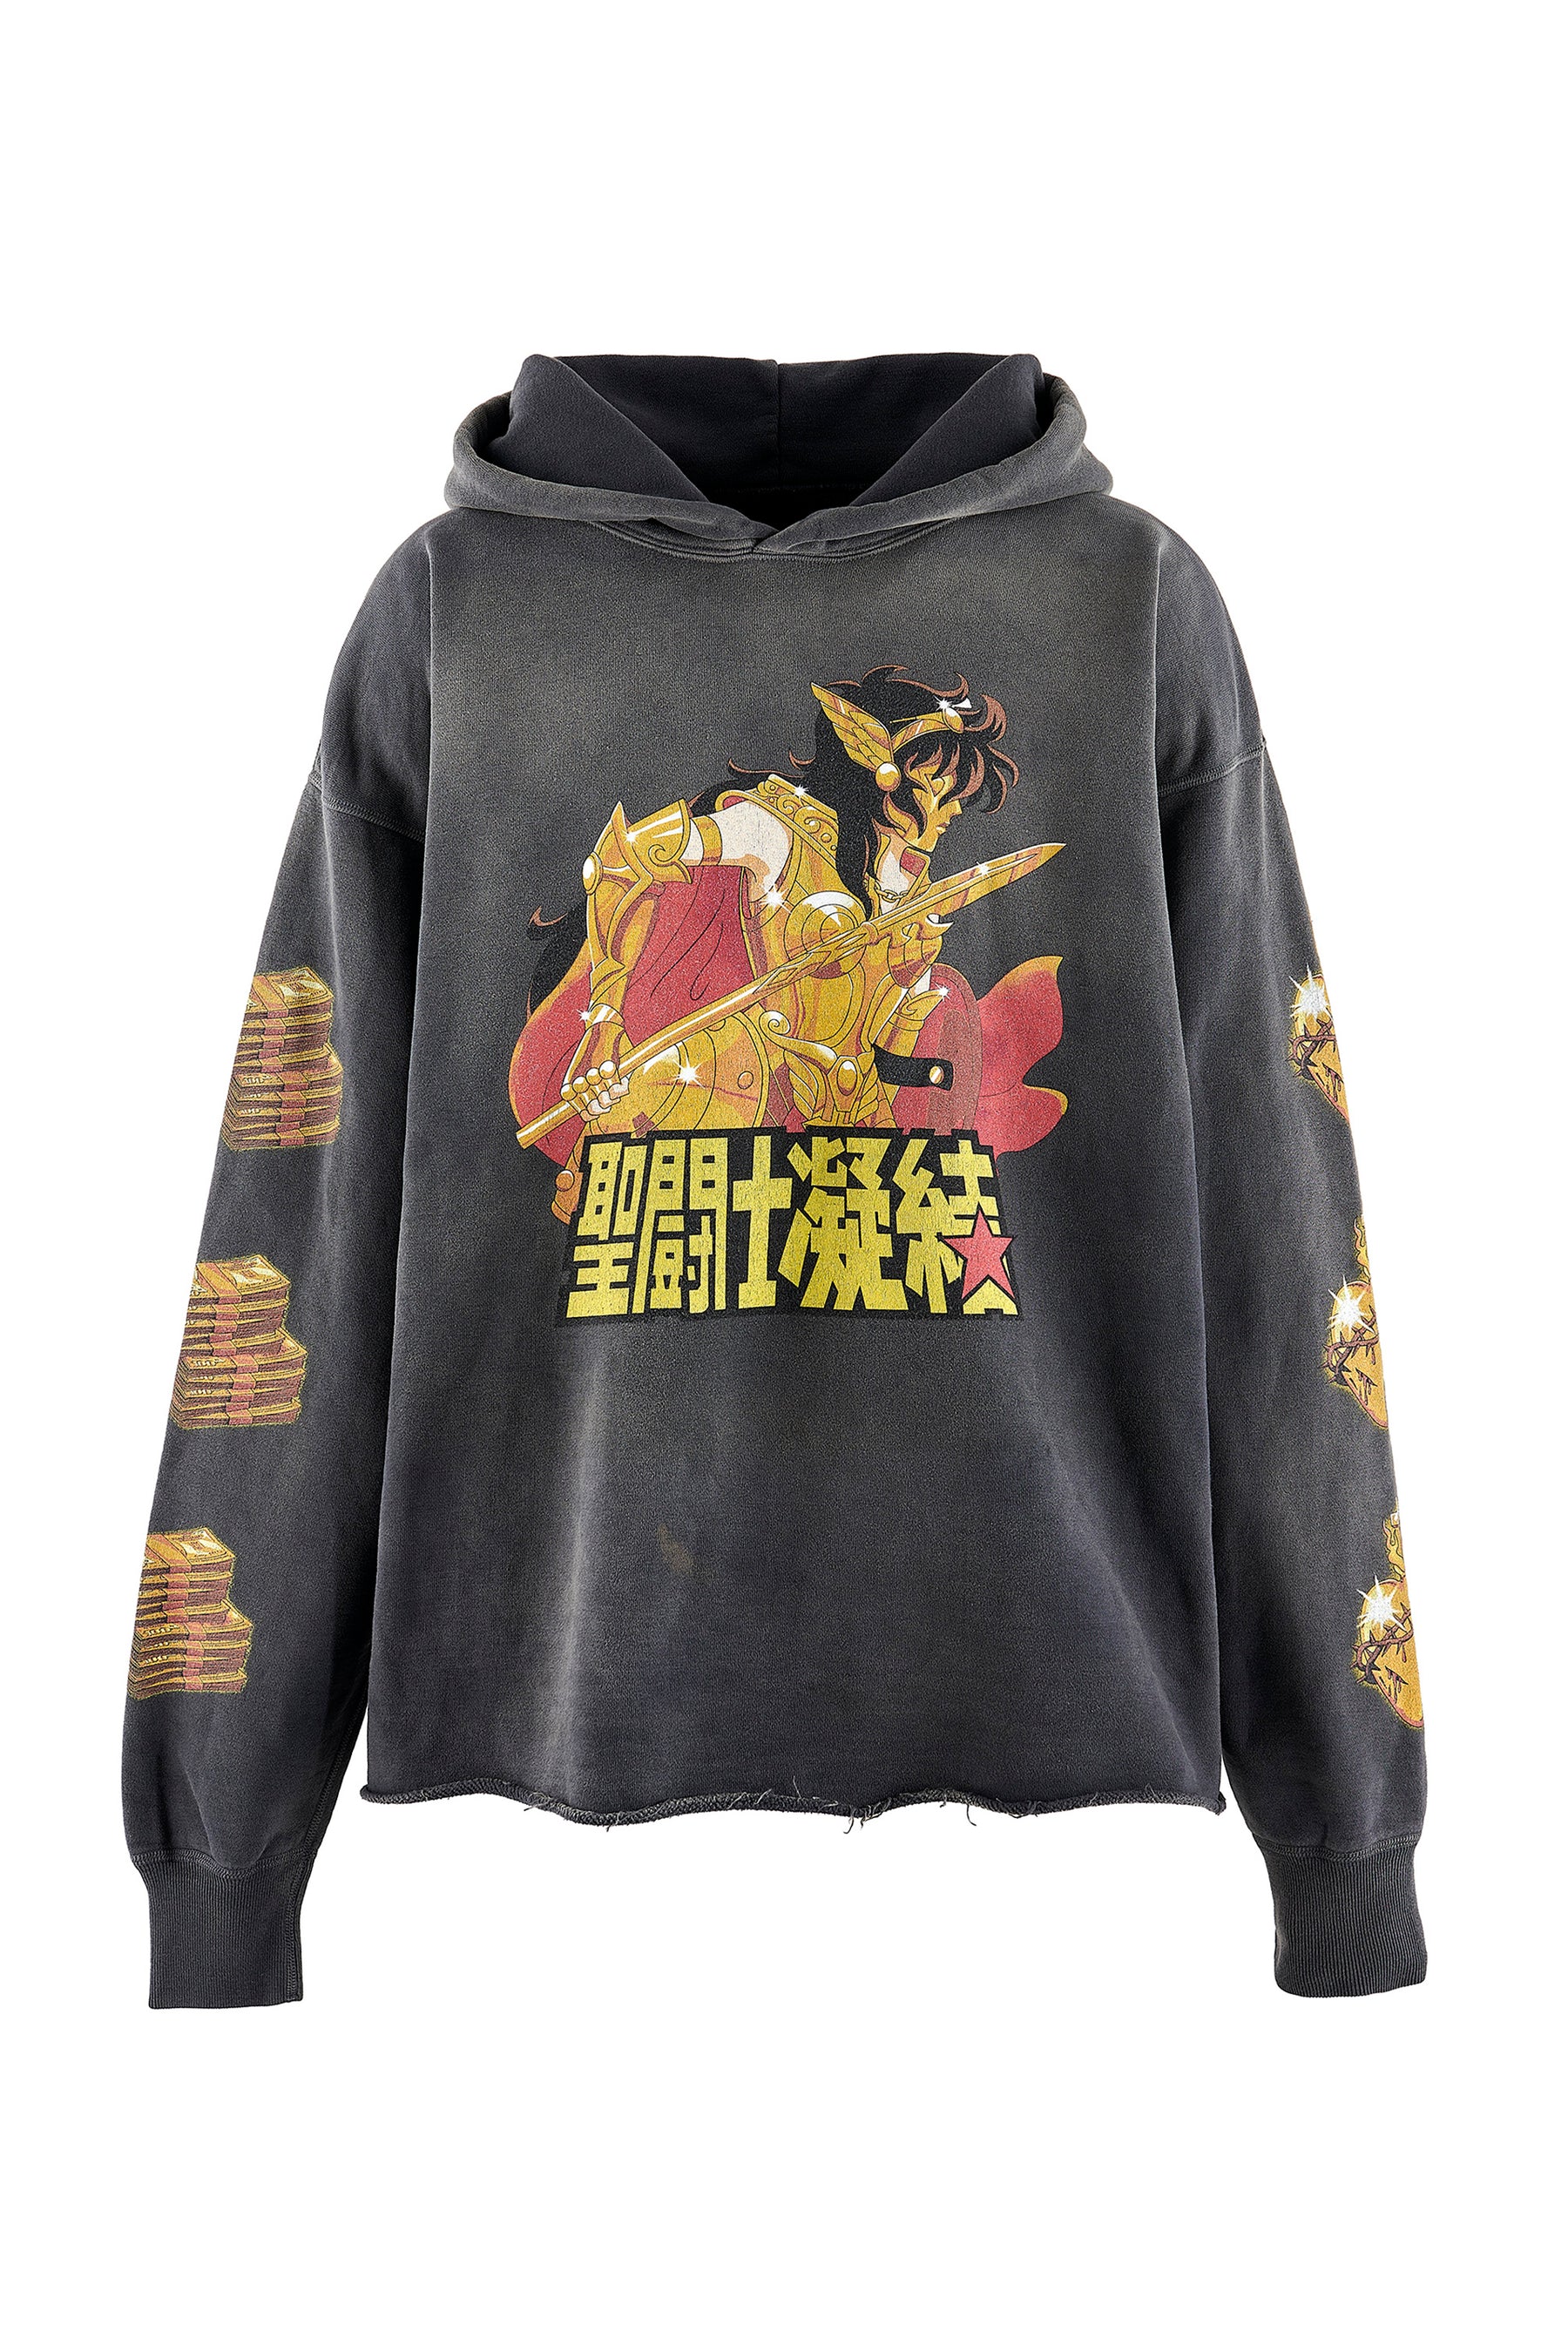 【XL】“セントマイケル”ALL Over Graphic Hoodie